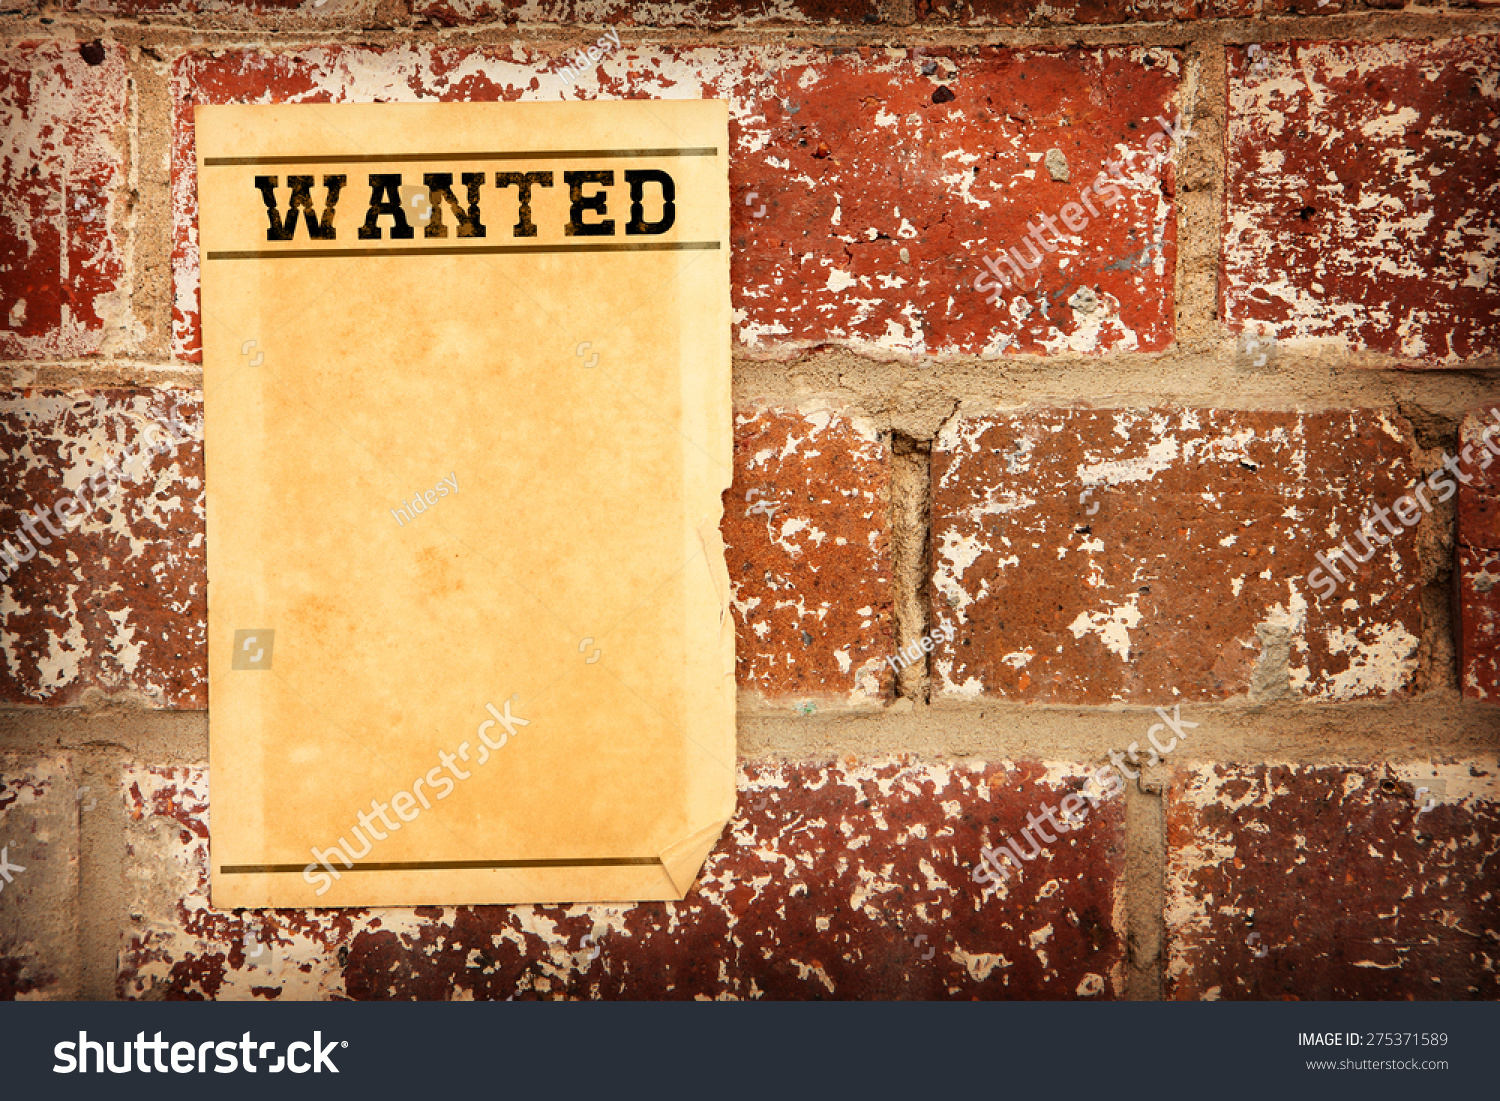 Wanted Poster On Wall Stock Photo 275371589 | Shutterstock